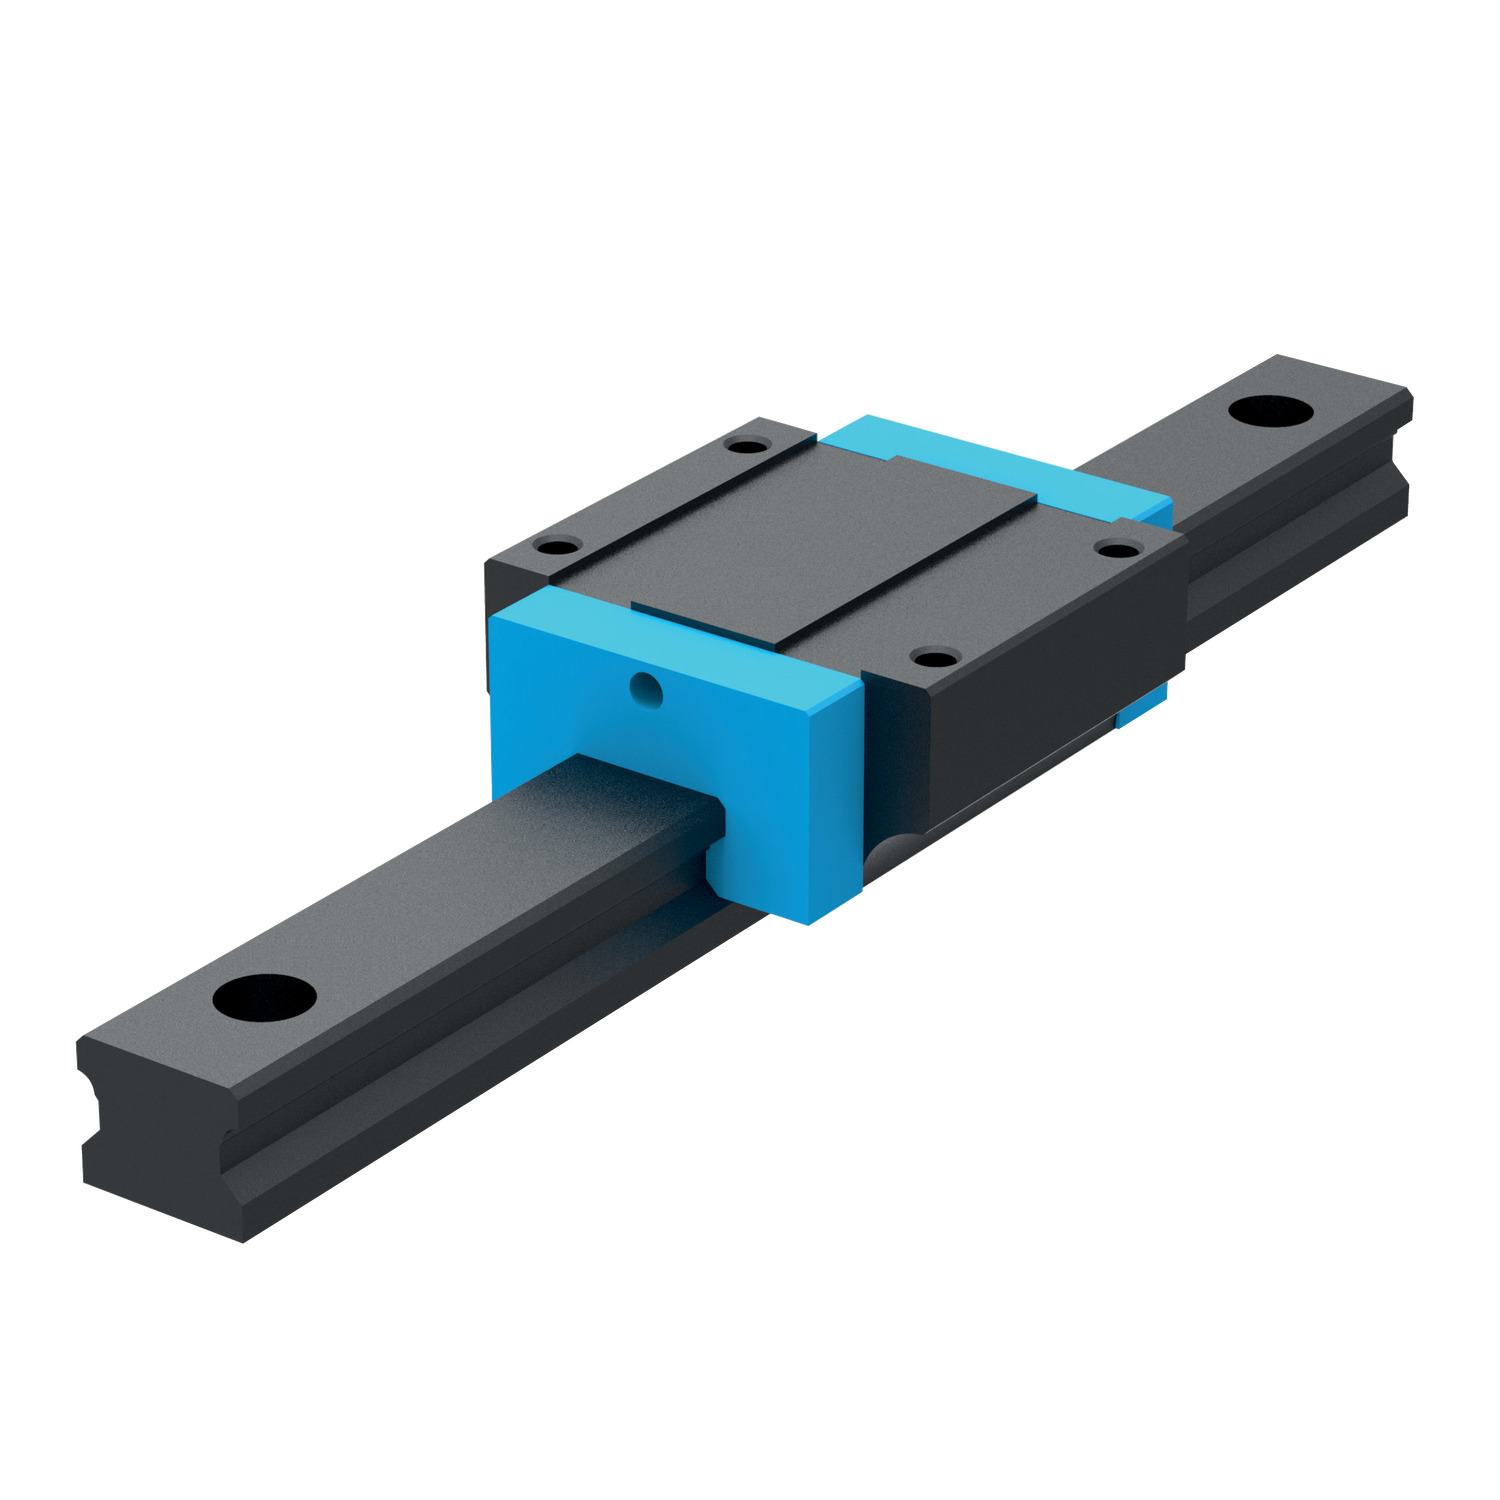 Linear Guideways Blackened front fixing linear rail, comes in 15mm, 20mm & 25mm lengths. Rear-fixing versions (L1016.BR) and matching blackened carriages (L1016.F-BC and L1016.U-BC) also available.